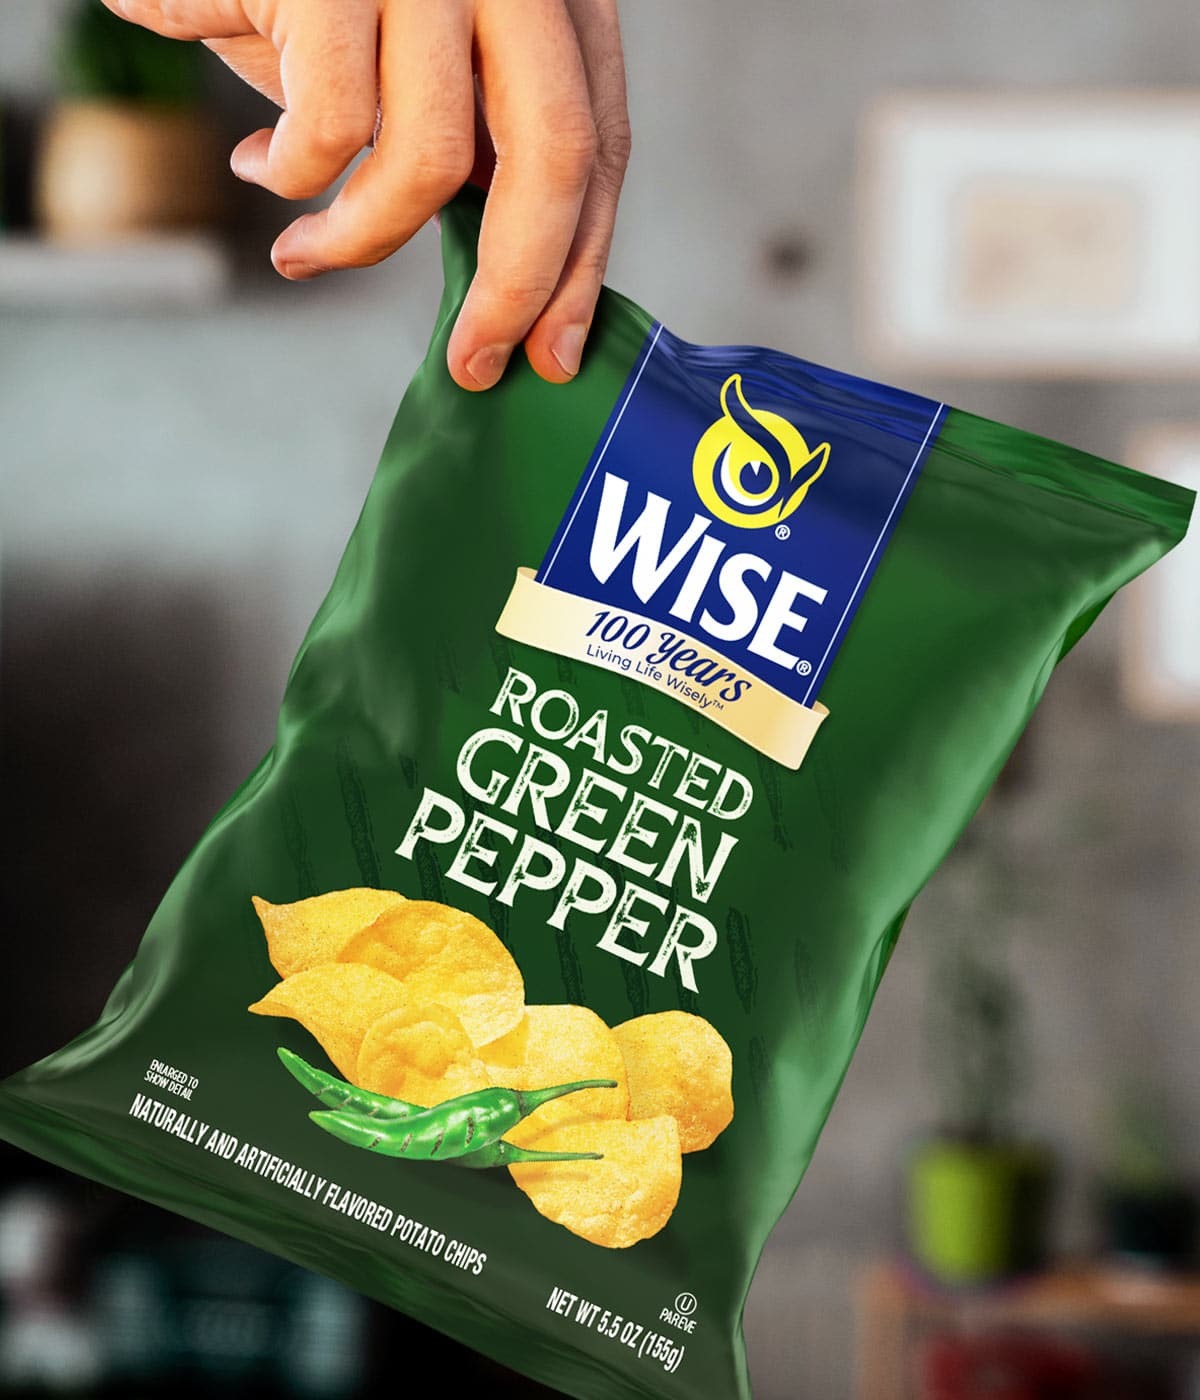 imaginity_wise_roasted_green_pepper_snacks_packaging_design_potato_chips